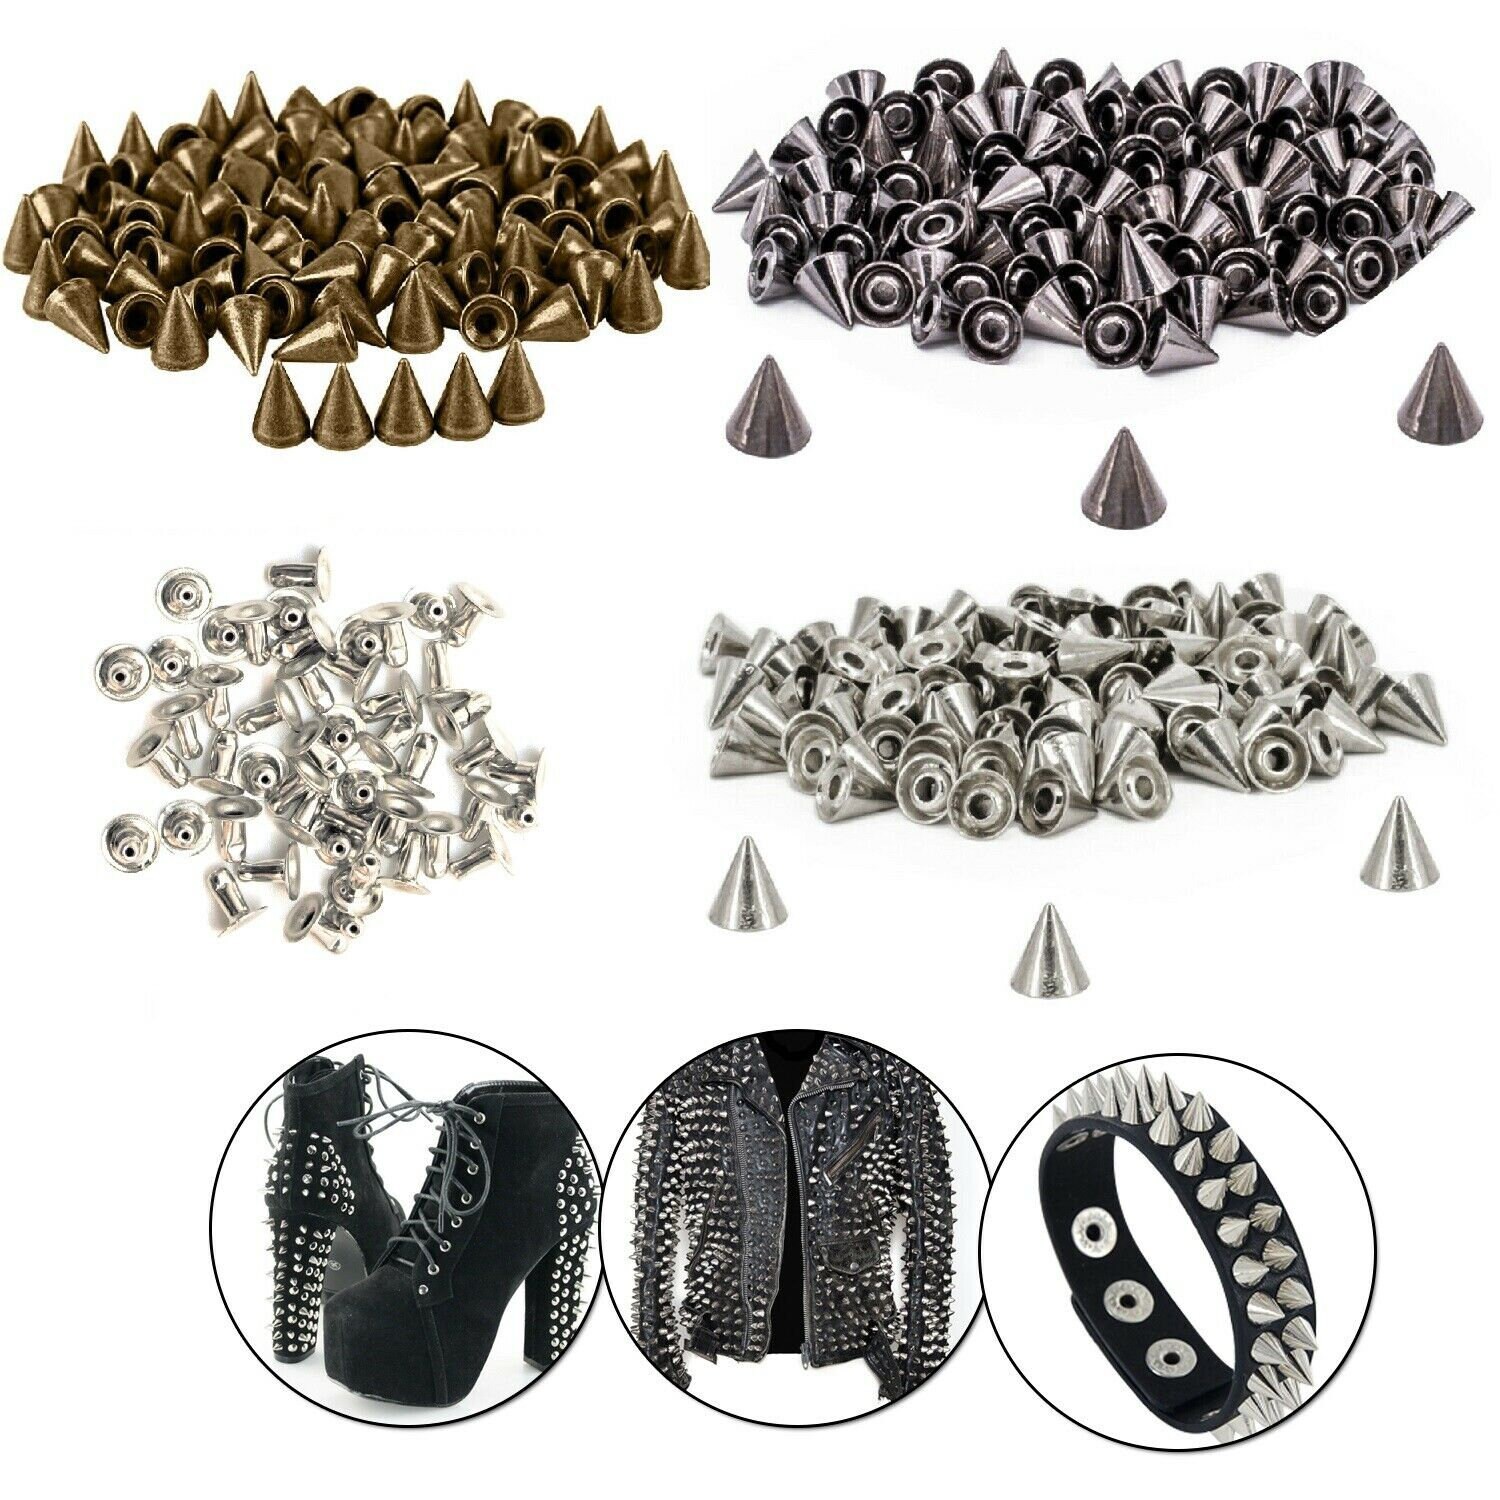 Sewing Notions Or Tools Studs And Spikes! 8mm Pyramid Stud Silver Punk Rock  DIY Rivet Spike From Red2015, $18.23